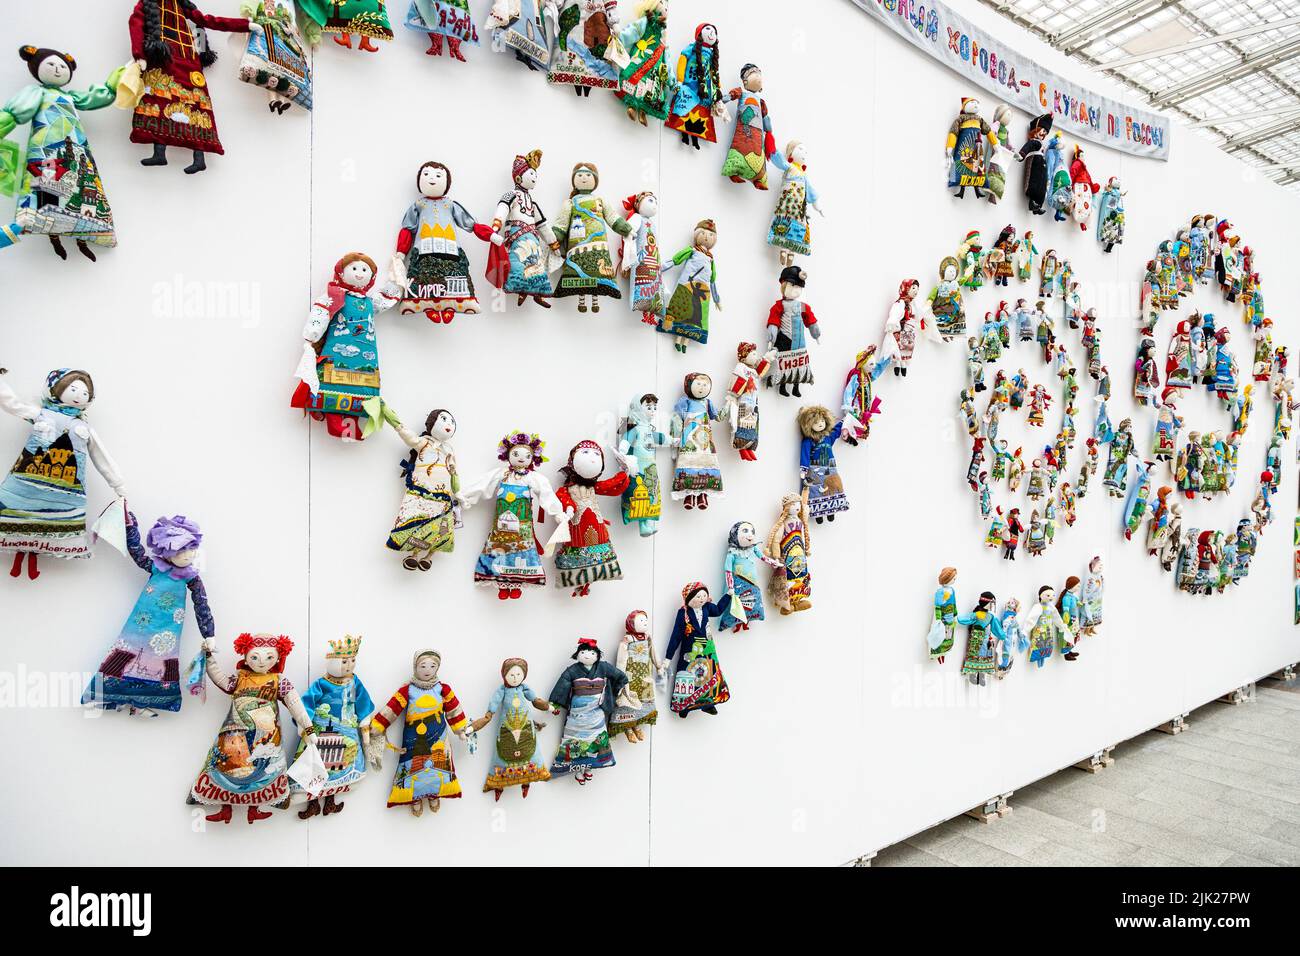 Moscow, Russia - July 22, 2022: stand with handmade patchwork dolls representing cities of Russia at international patchwork Festival of Soul of Russi Stock Photo